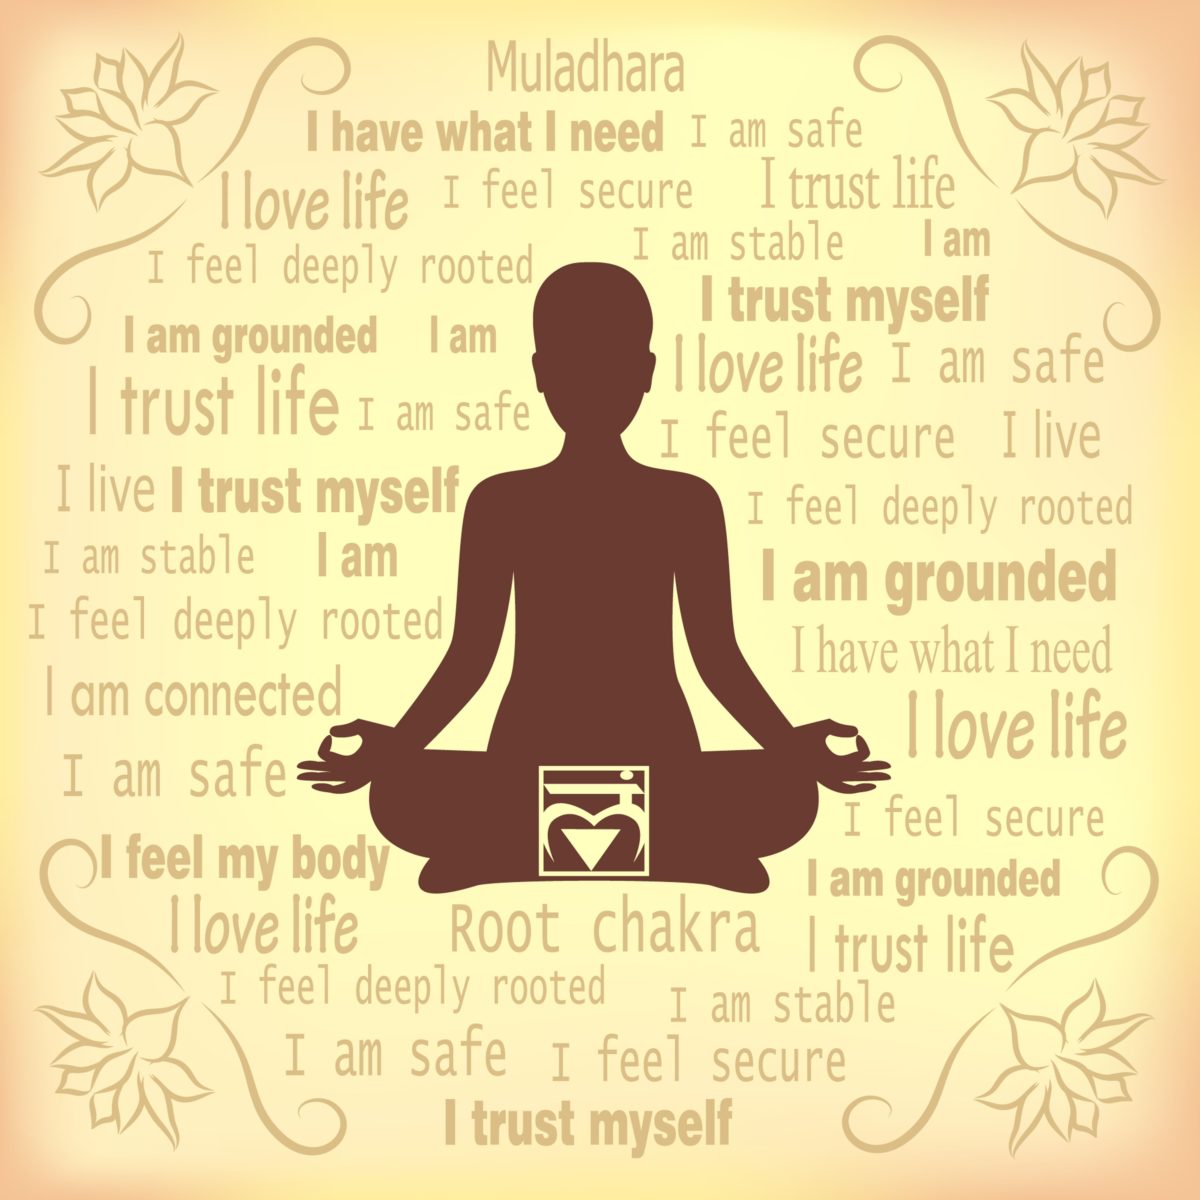 Image with root chakra mantras